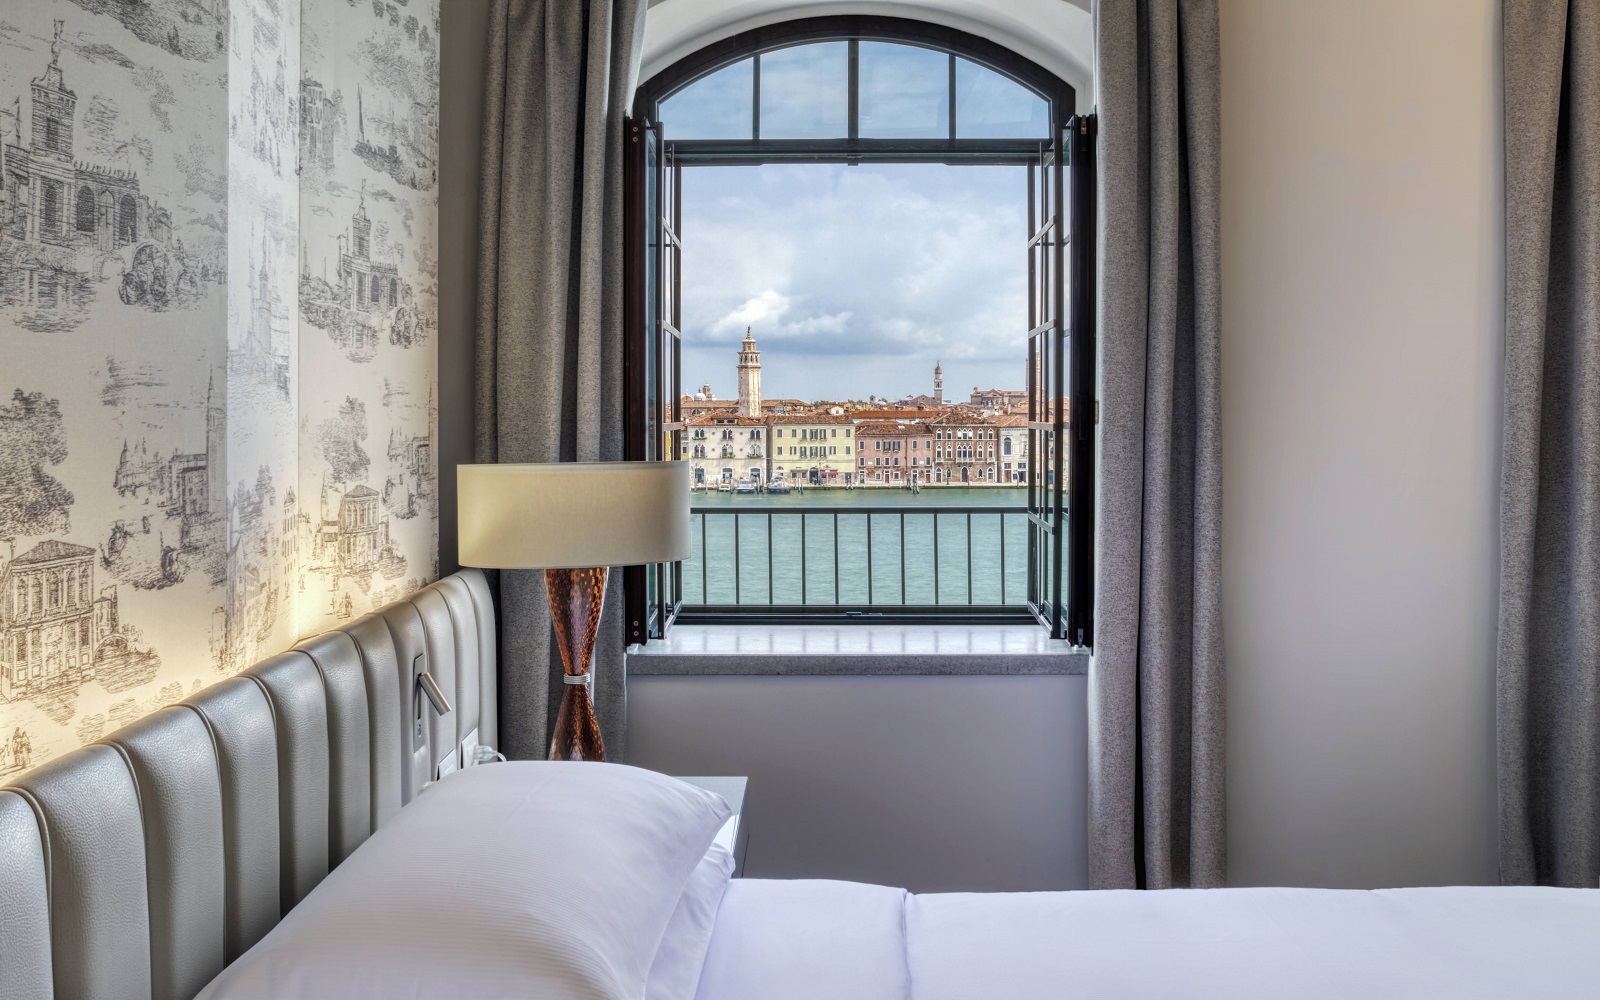 view across the canal to Venice from guestroom in Hilton Molino Stucky Venice